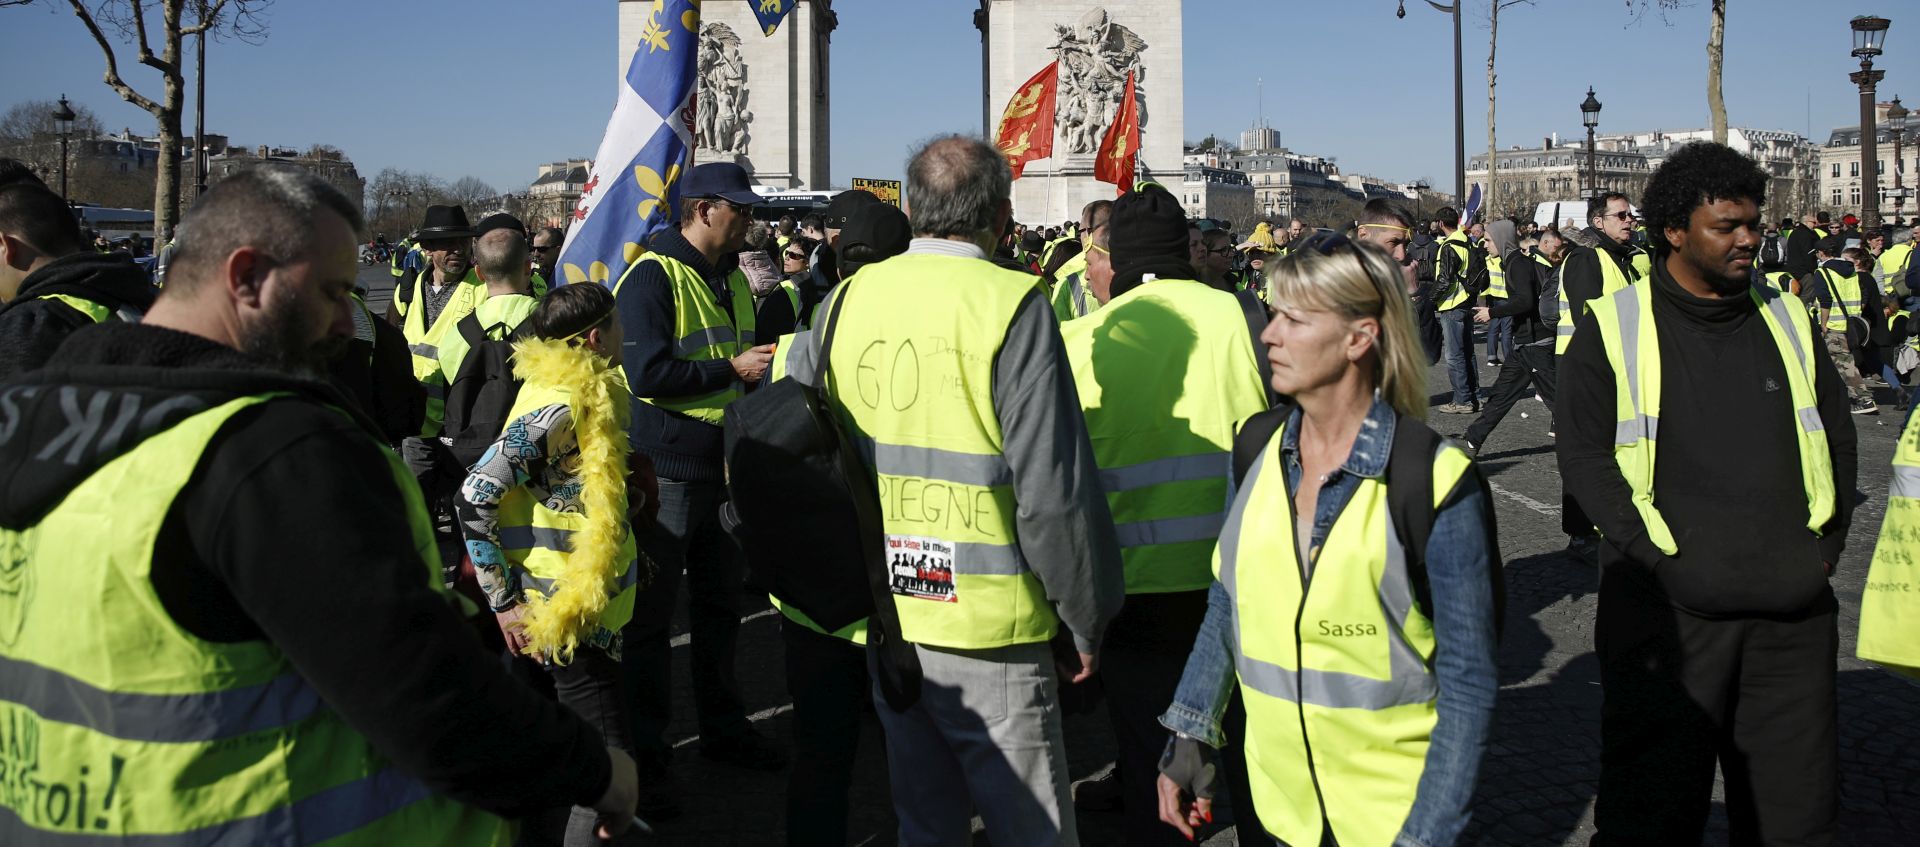 epa07389890 Protesters from the 'Gilets Jaunes' (Yellow Vests) movement gather at the Champs Elysees as they take part in the 'Act XV' demonstration (the 15th consecutive national protest on a Saturday) in Paris, France, 23 February 2019. The so-called 'gilets jaunes' (yellow vests) is a grassroots protest movement with supporters from a wide span of the political spectrum, that originally started with protest across the nation in late 2018 against high fuel prices. The movement in the meantime also protests the French government's tax reforms, the increasing costs of living and some even call for the resignation of French President Emmanuel Macron.  EPA/YOAN VALAT